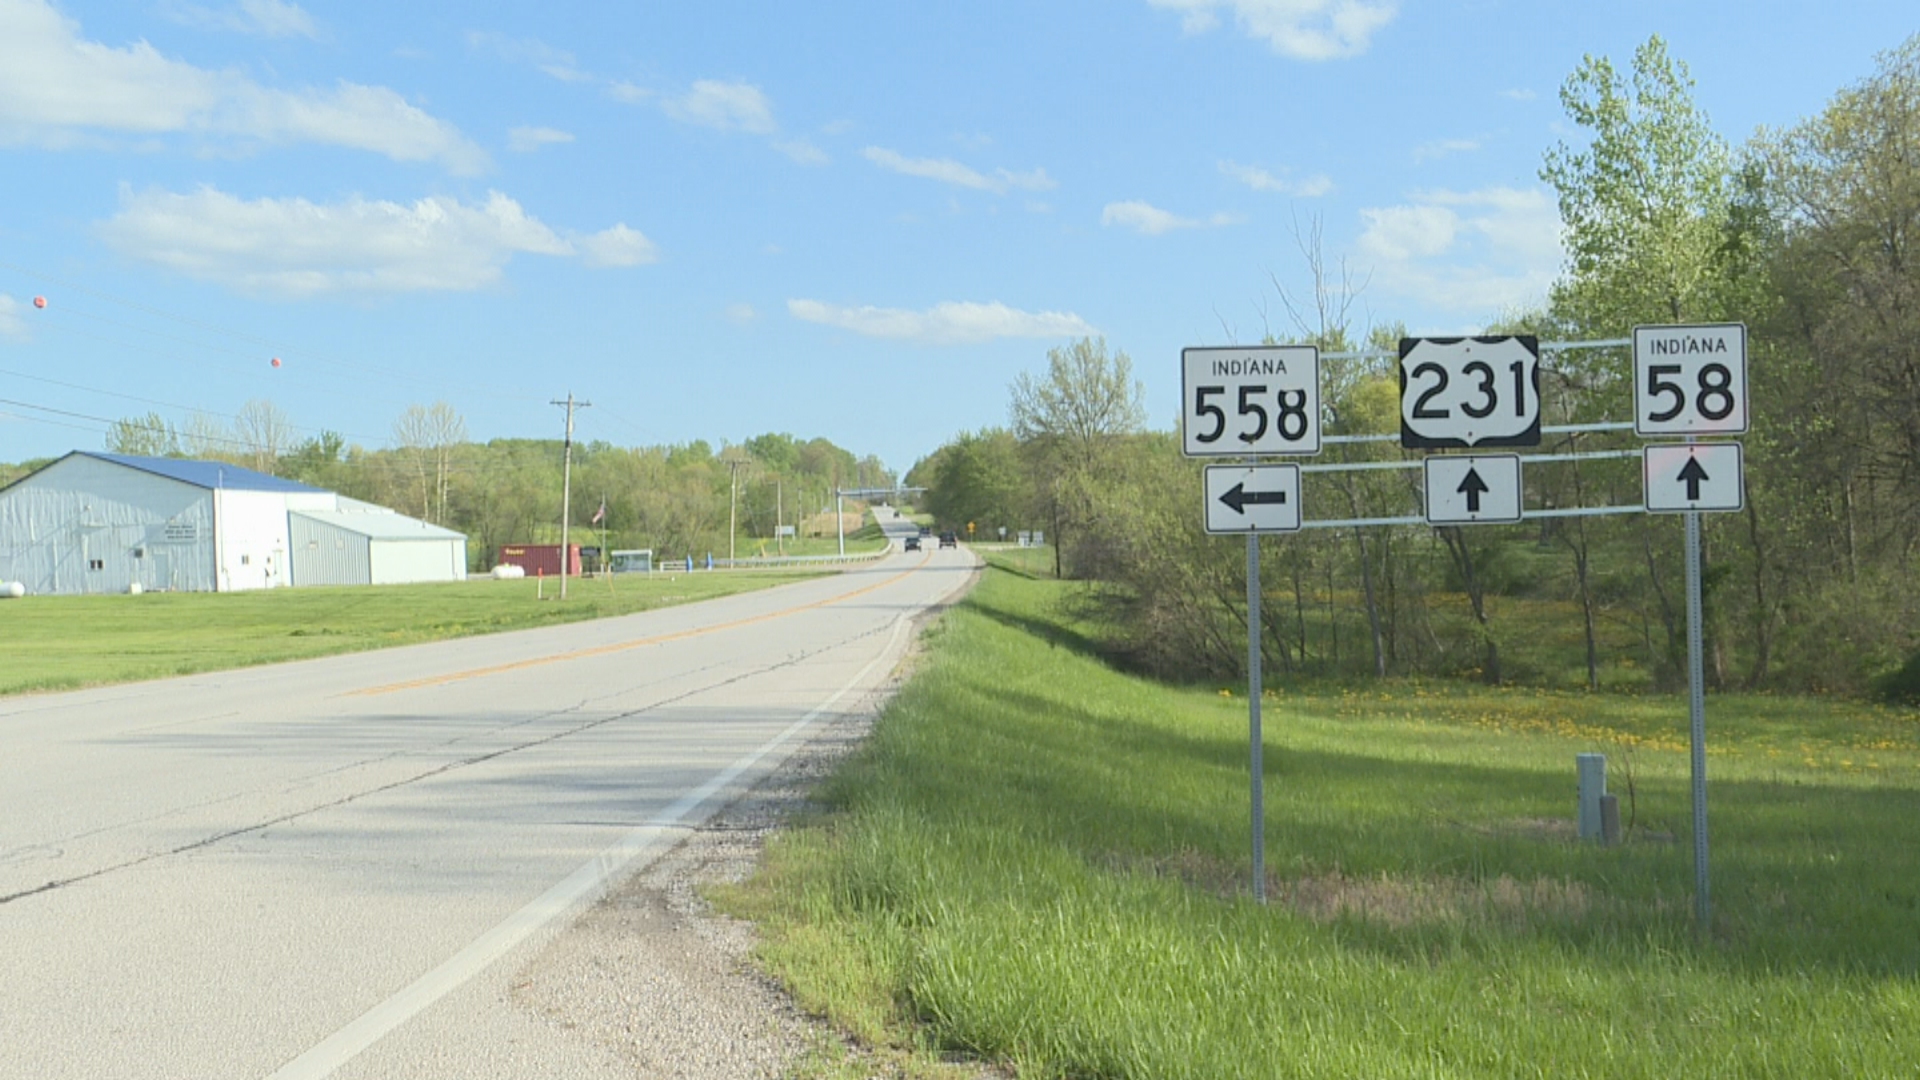 Residents try to block proposed highway in southern Indiana